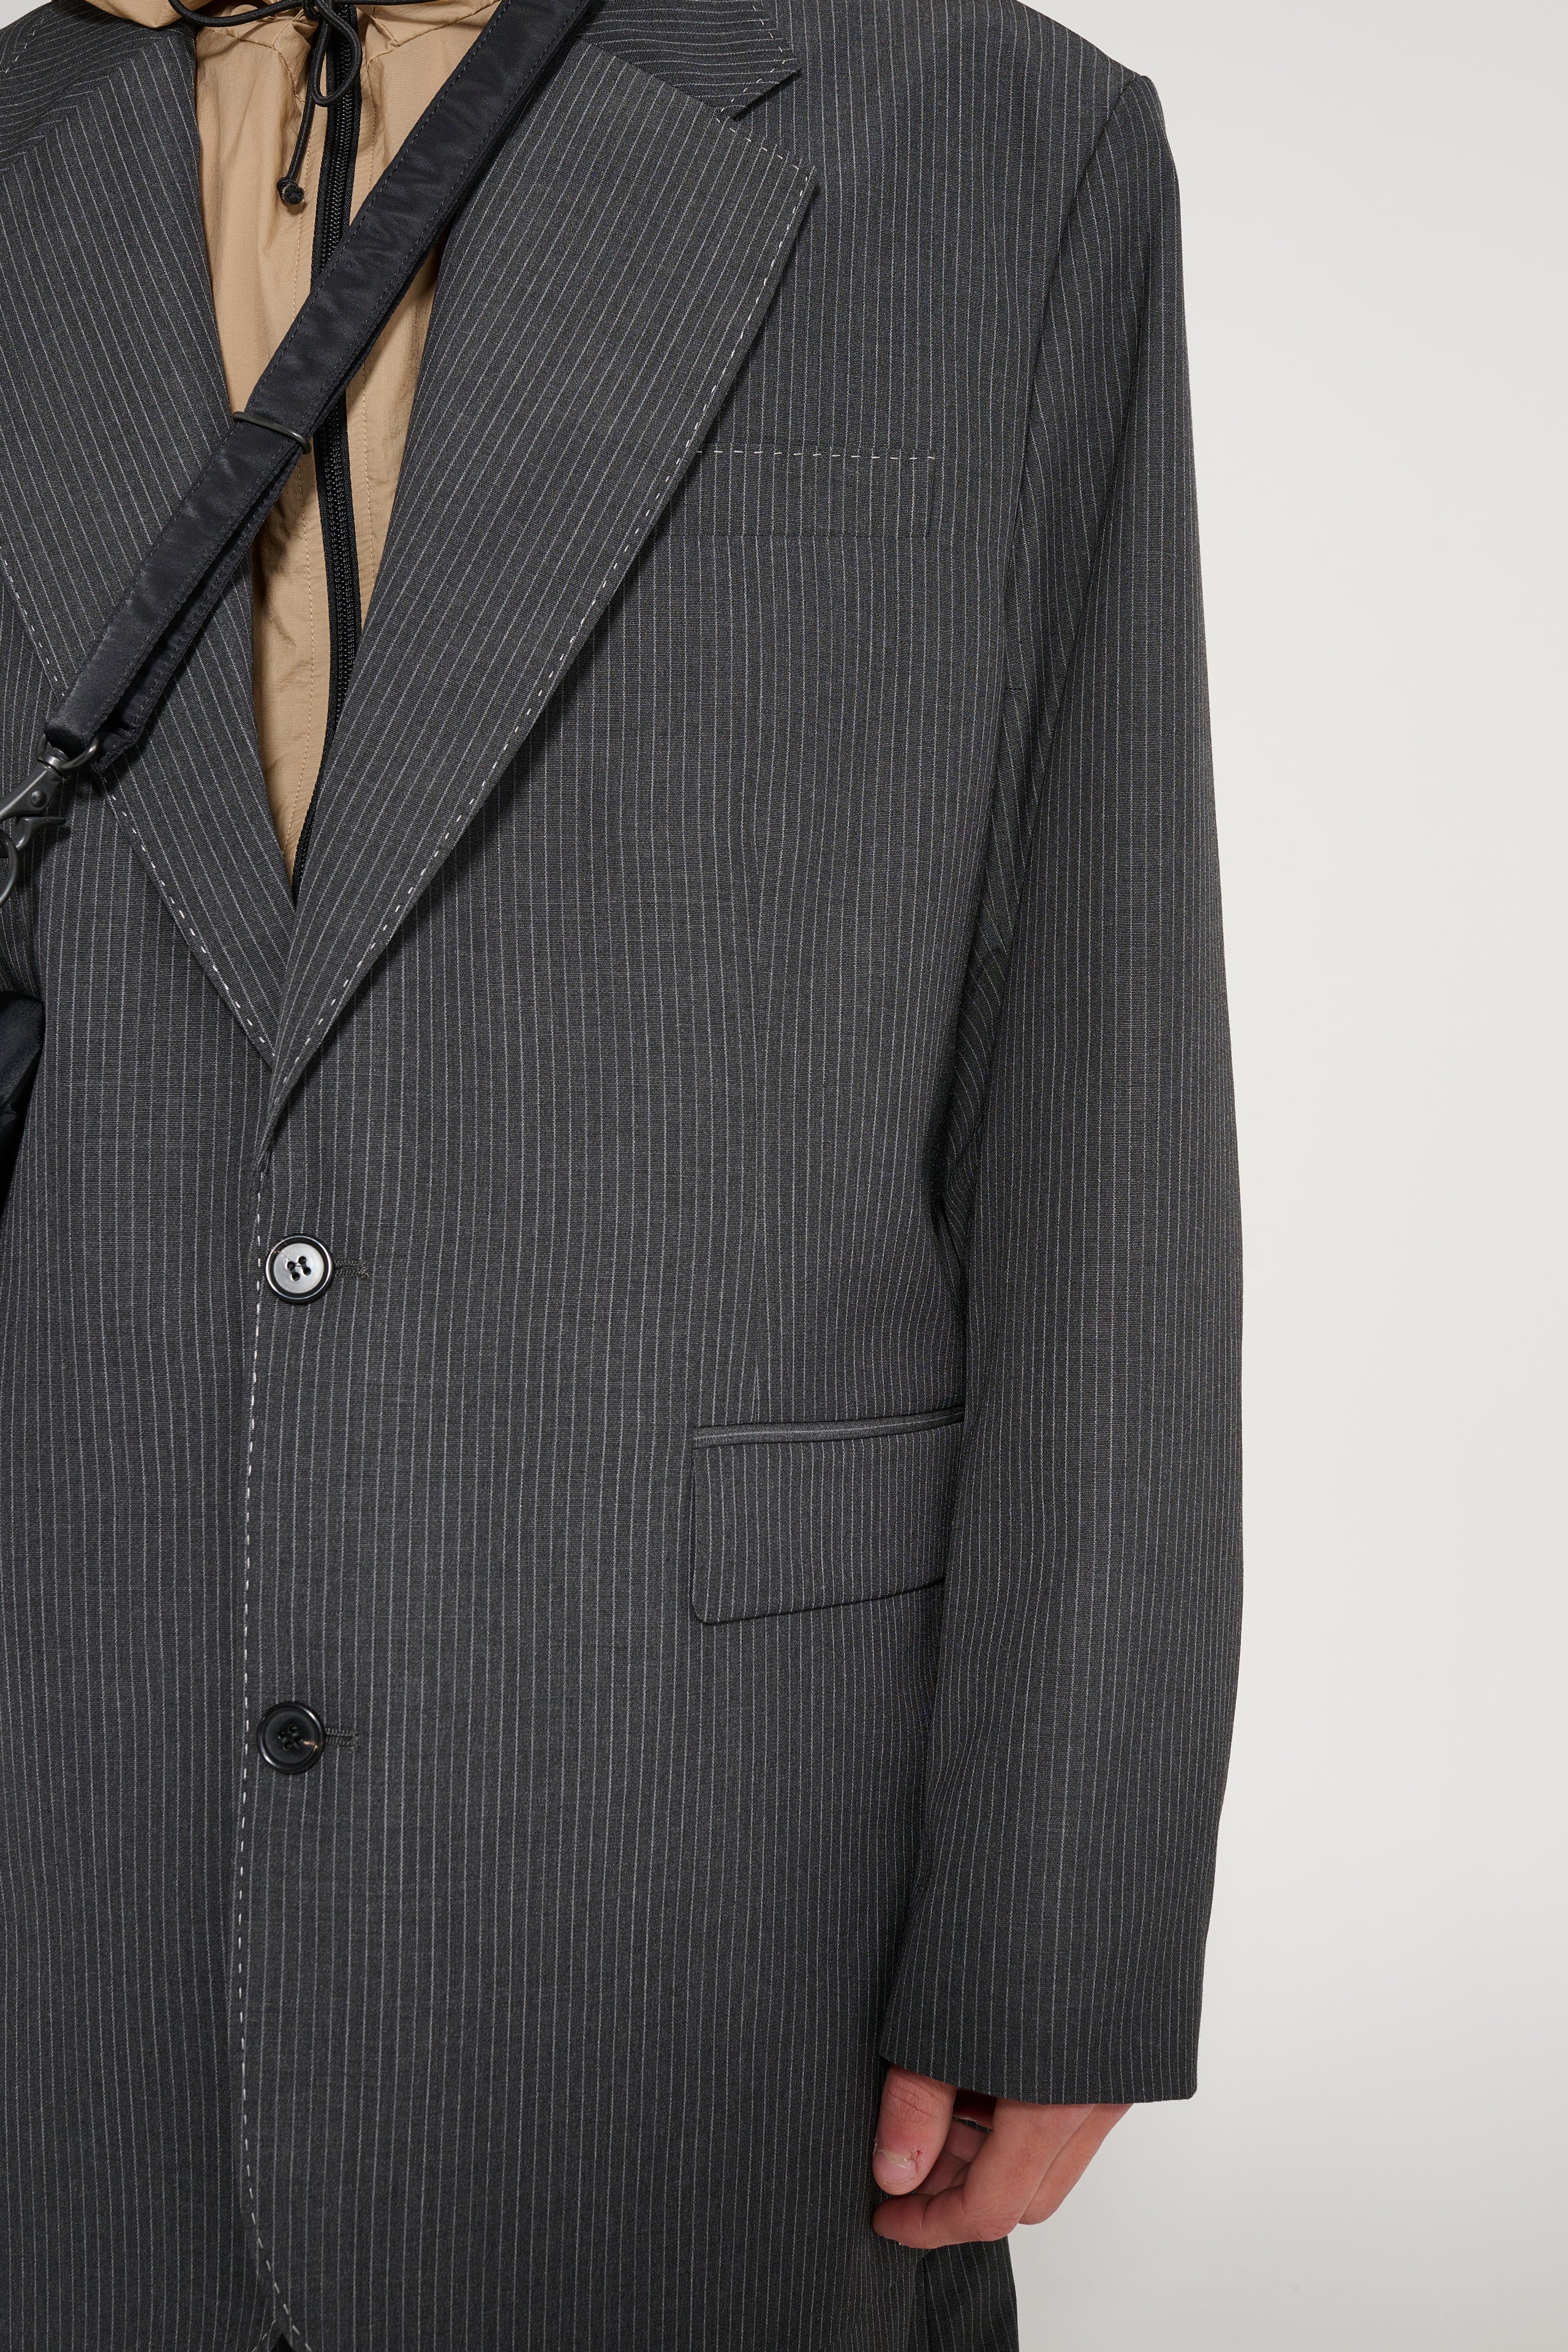 Acne Studios Relaxed Fit Suit Jacket Anthracite Grey